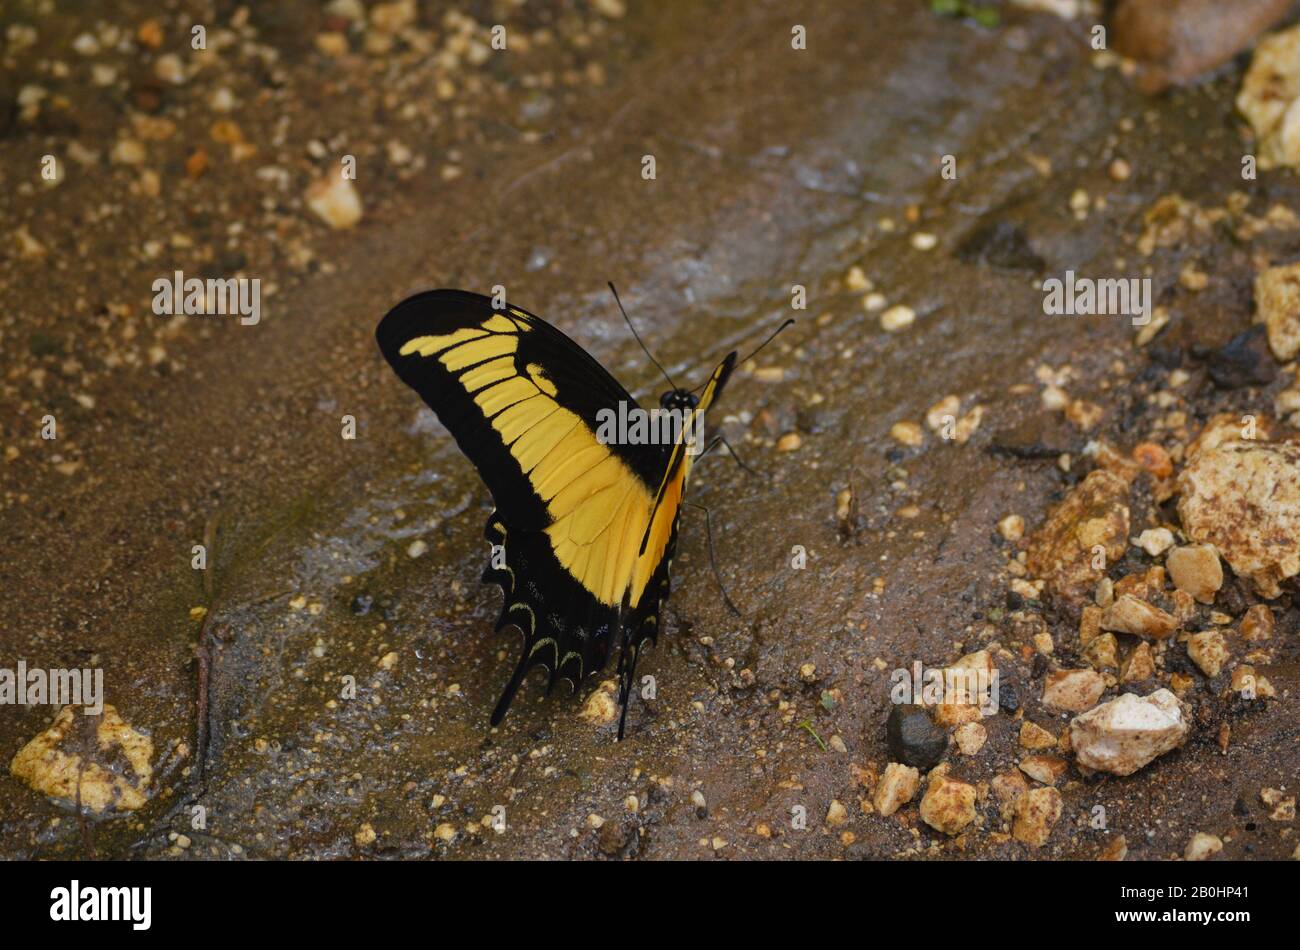 A butterfly absorbing mineral salts from the wet soil by a small stream, southern Cuba Stock Photo